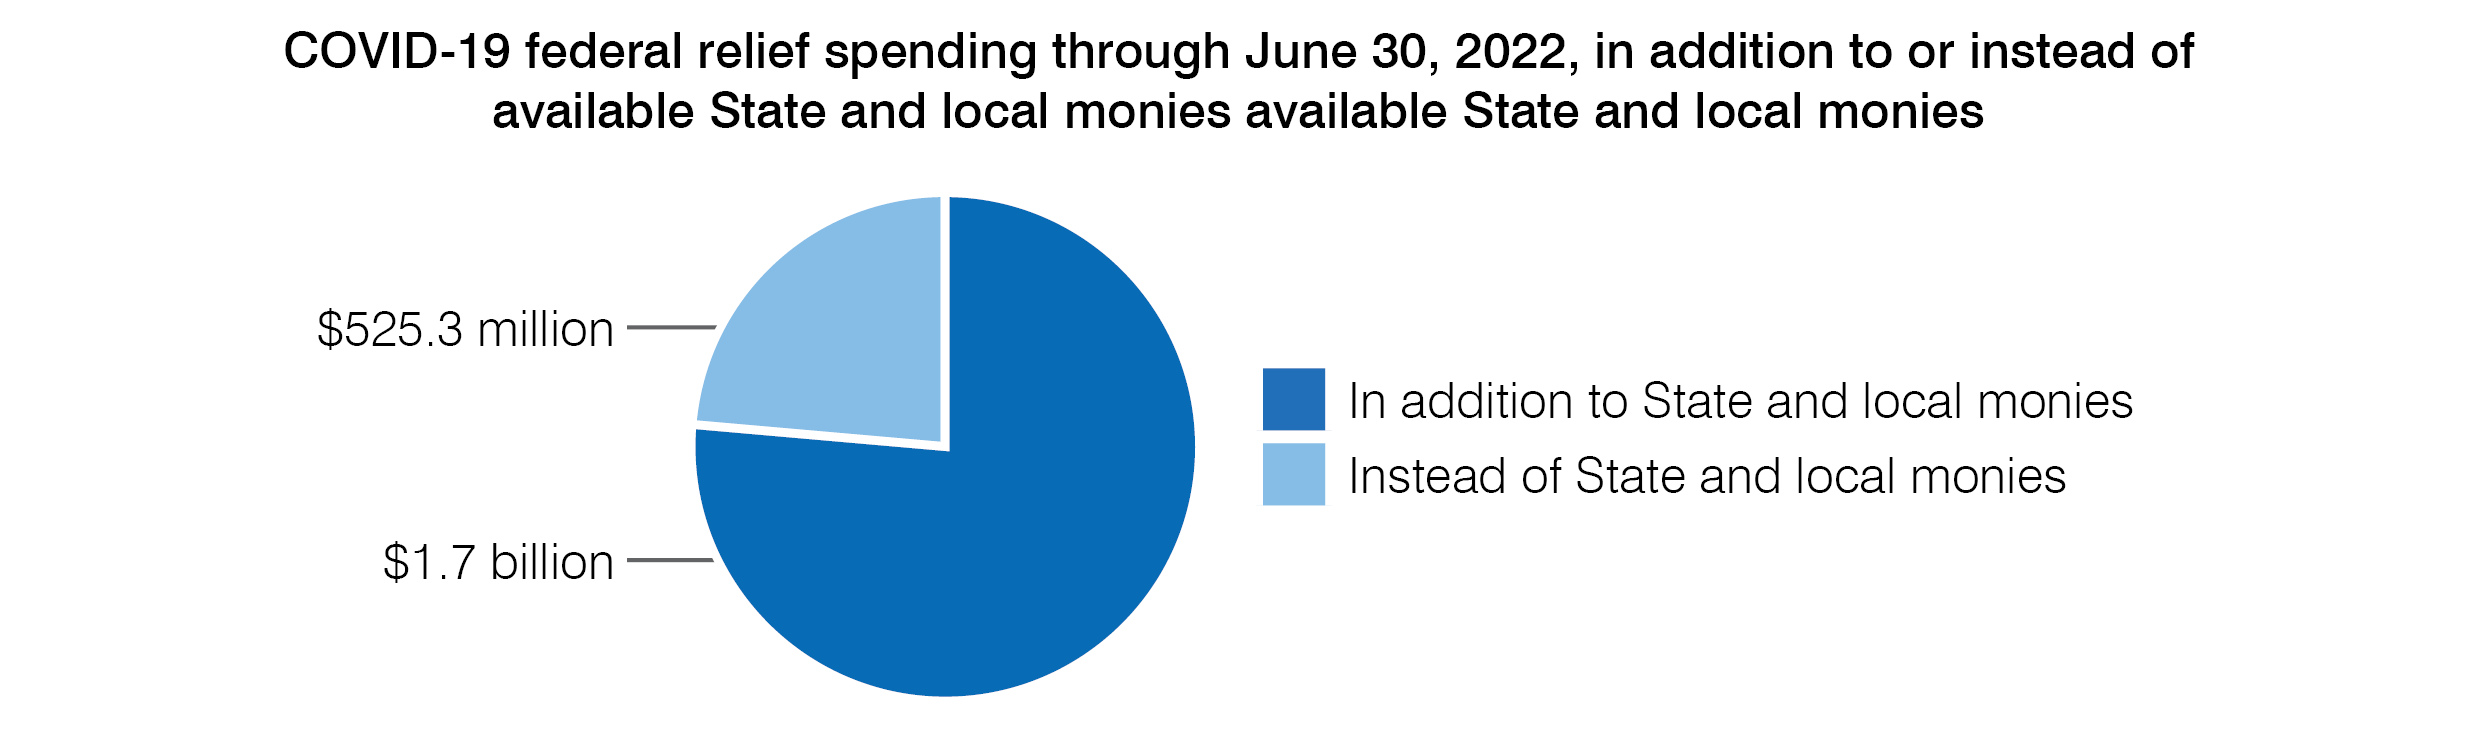 Pie Chart (COVID-19 federal relief spending through June 30, 2022, in addition to or instead of available State and local monies available State and local monies)